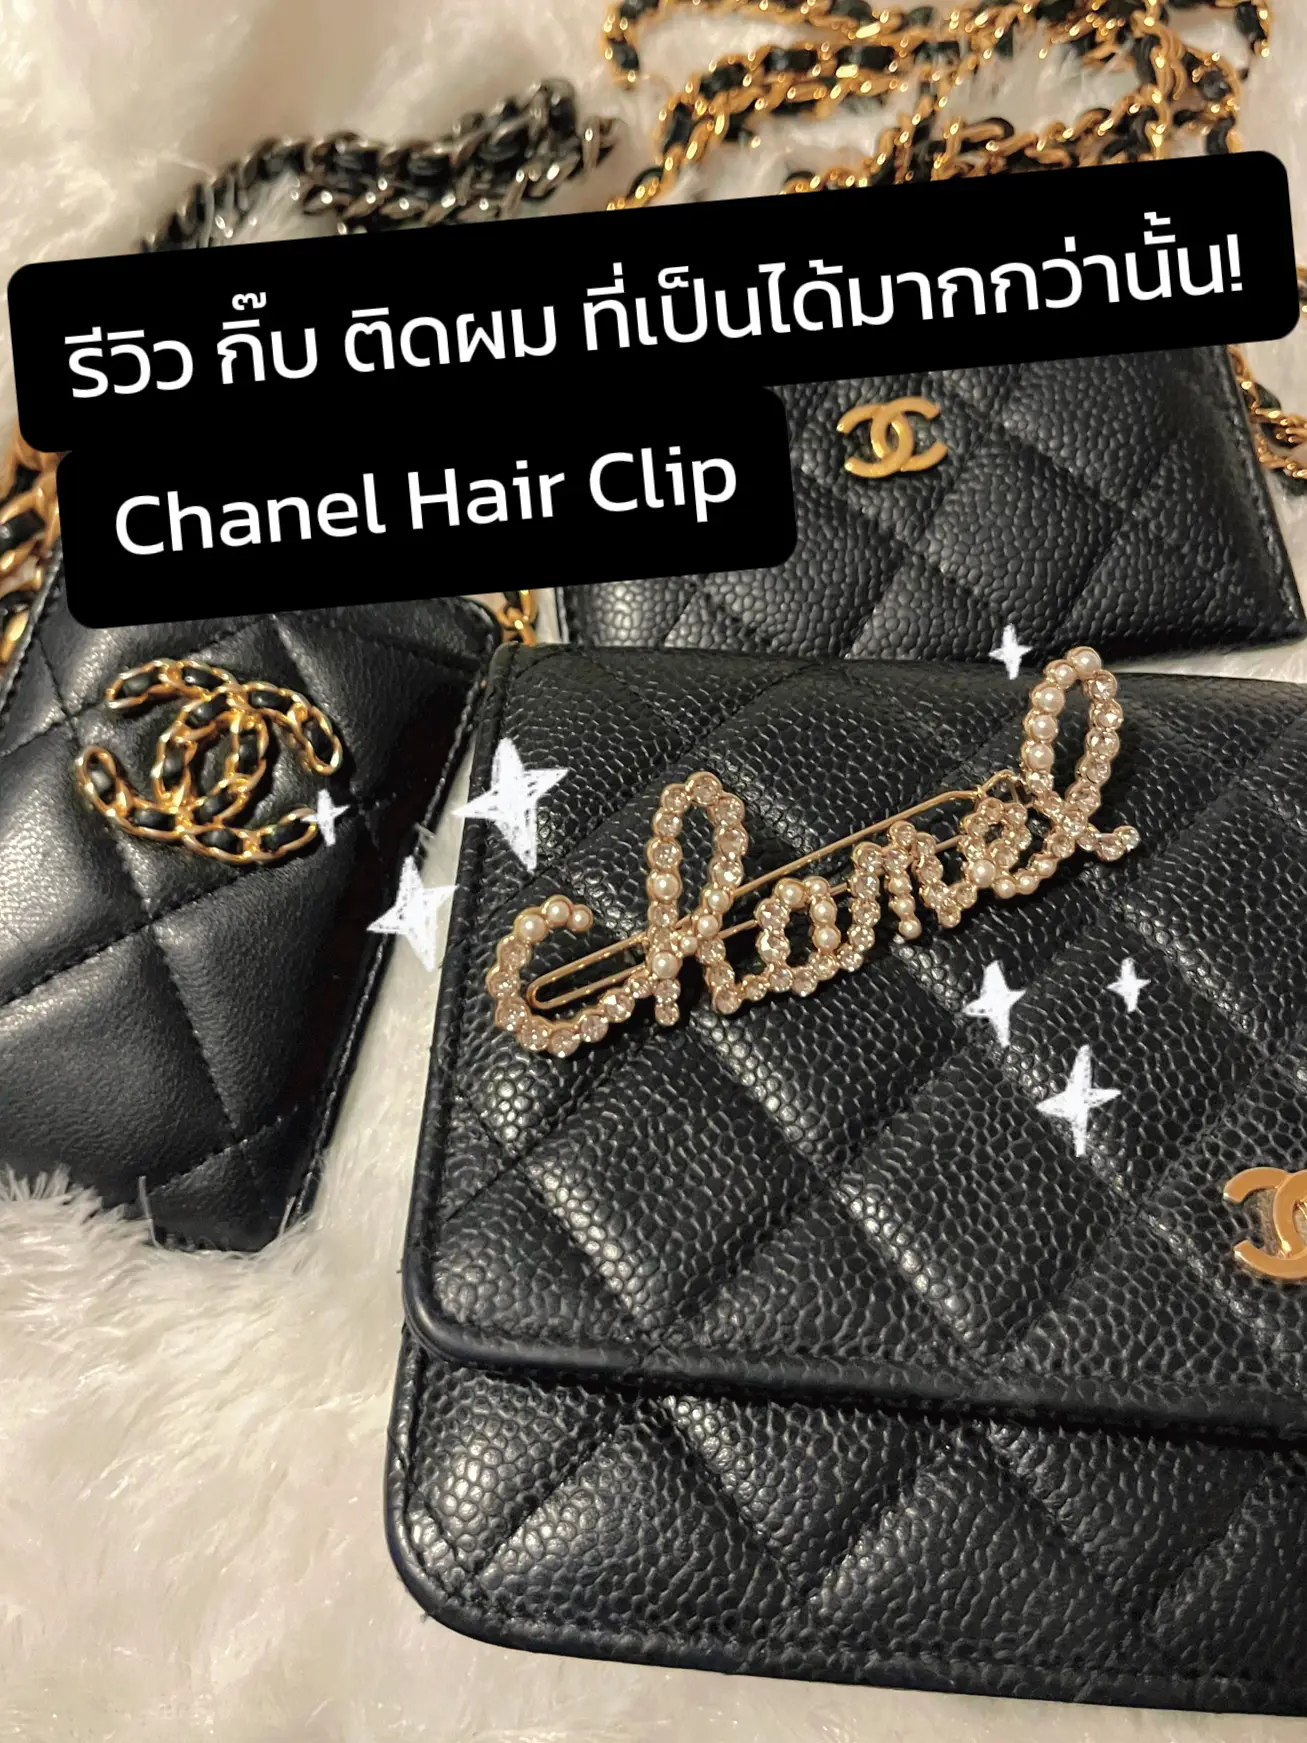 Chanel Hair Clip ✨ That Can Be More Than A Hair. Worth The Price, Gallery  posted by ✨khongkwan✨